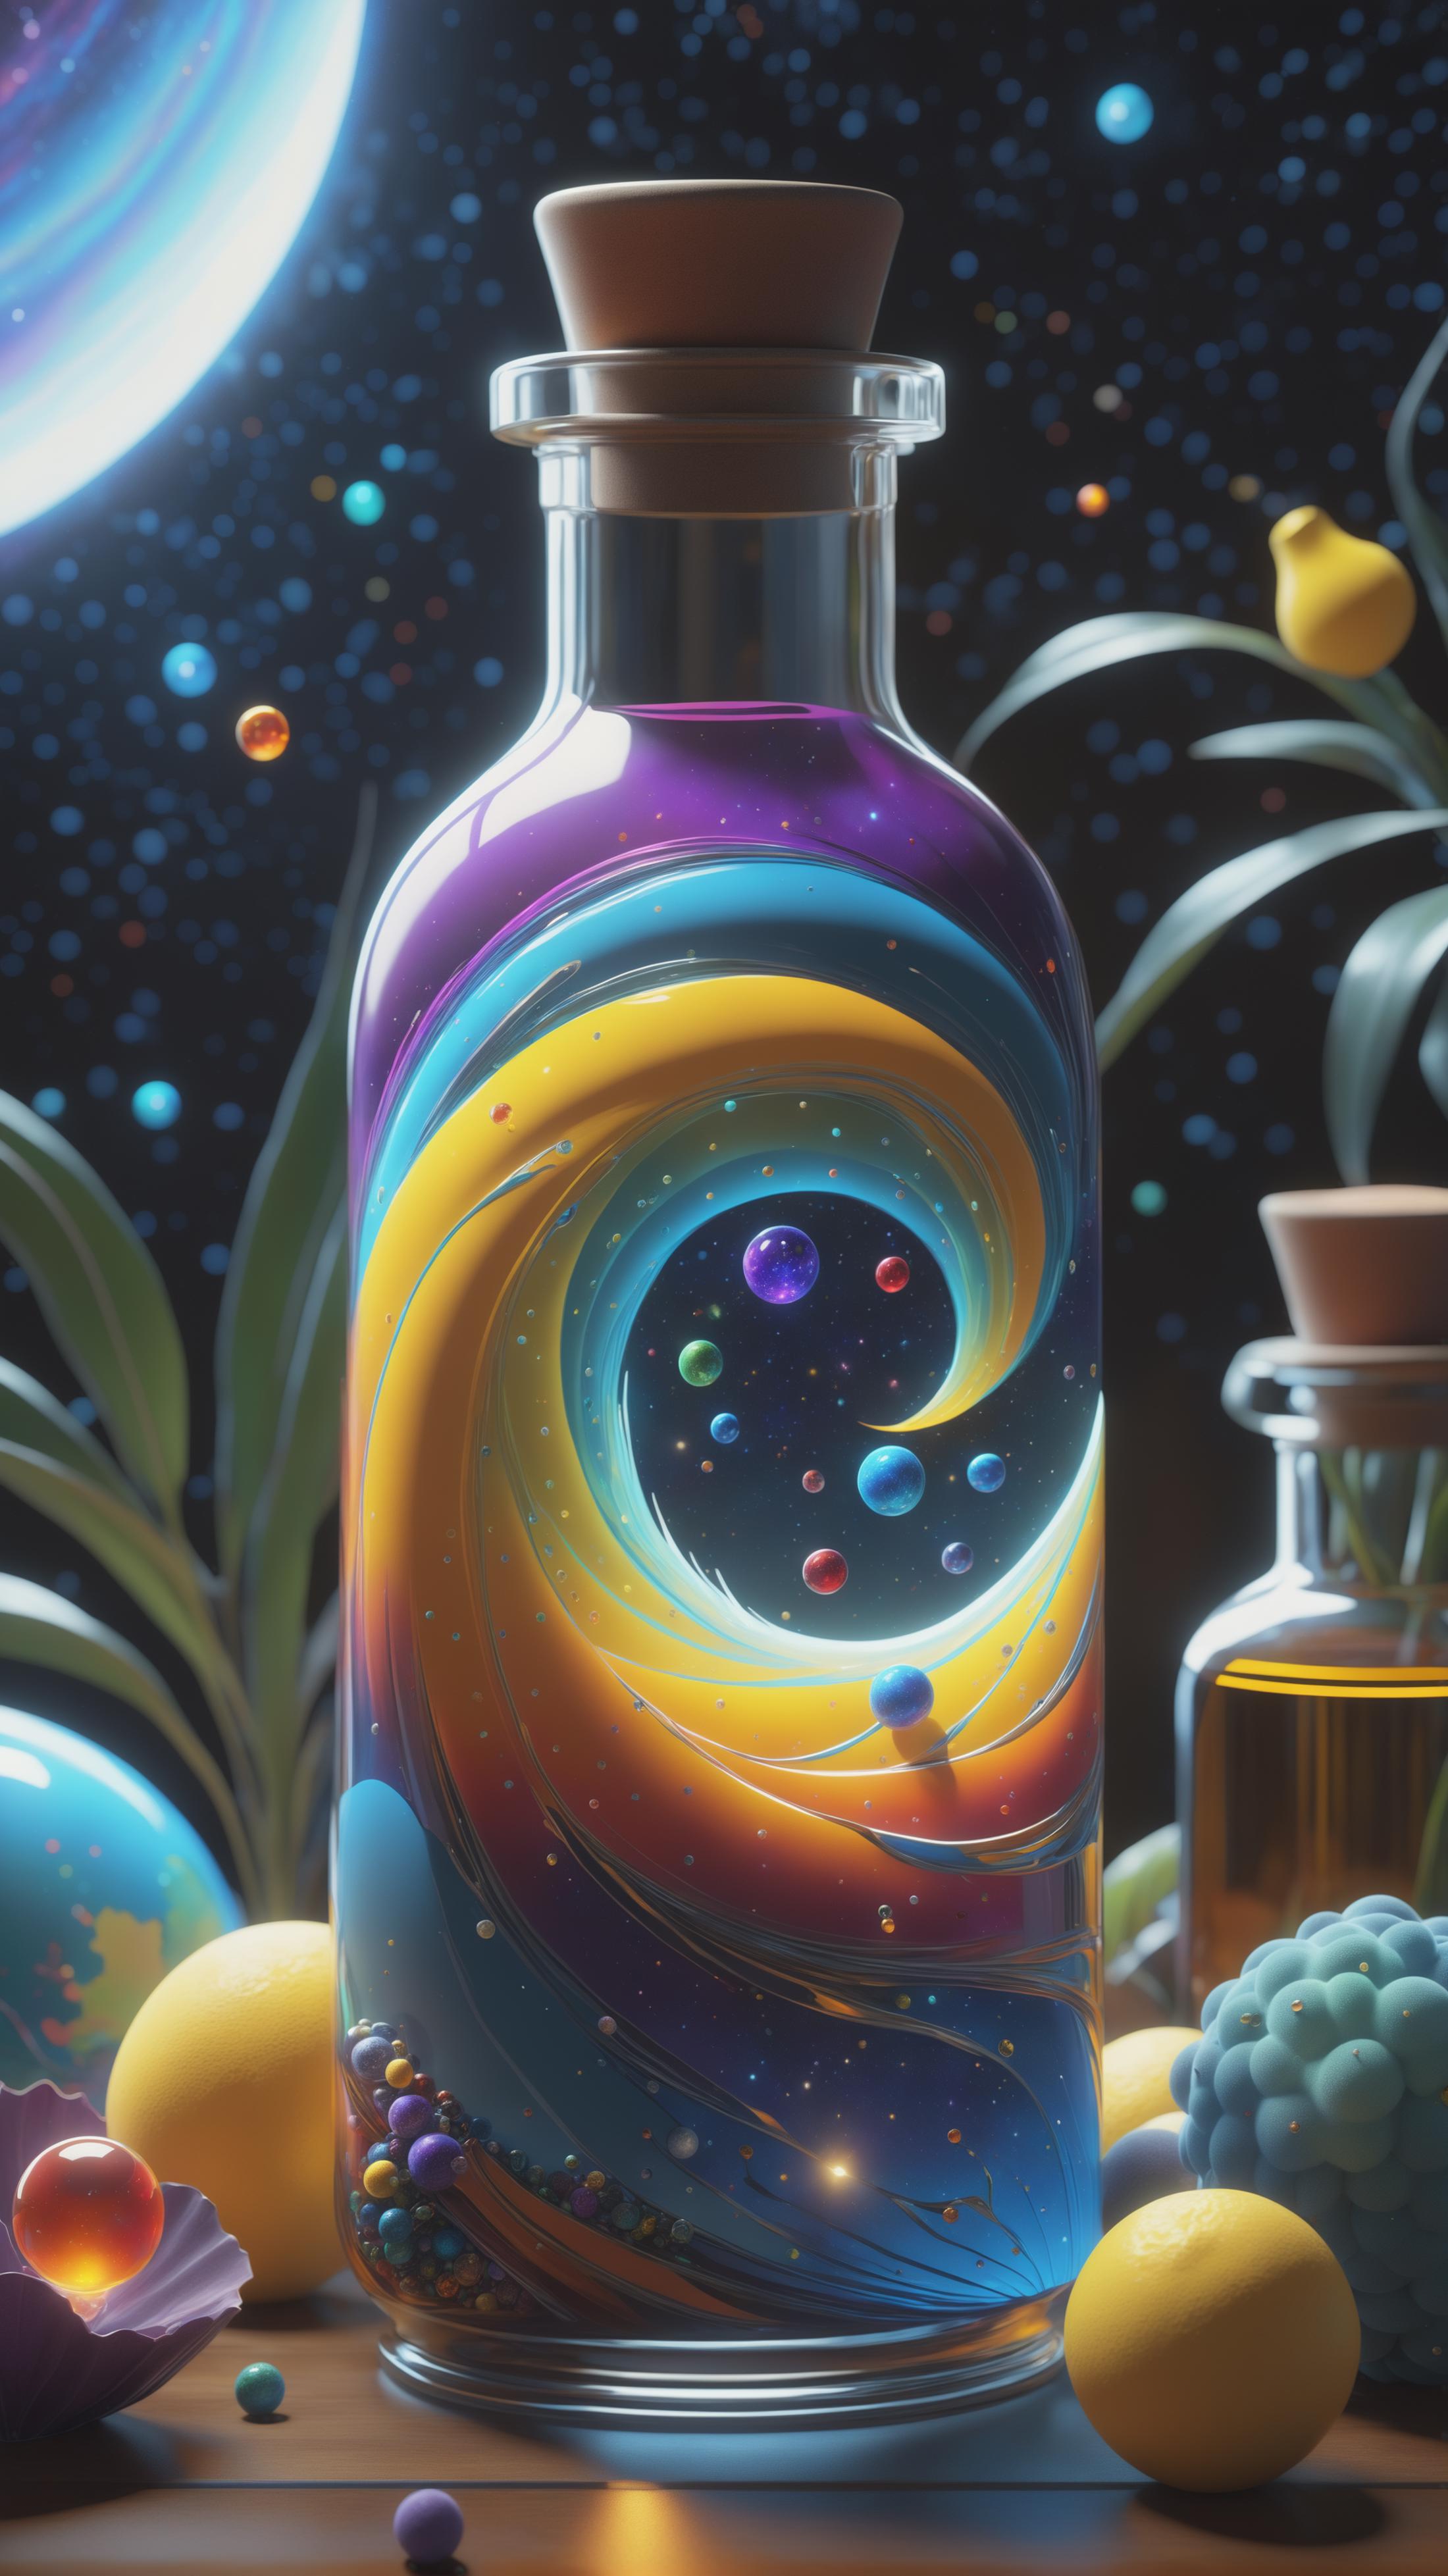 Colorful Bottle with Swirls and Planets on a Table